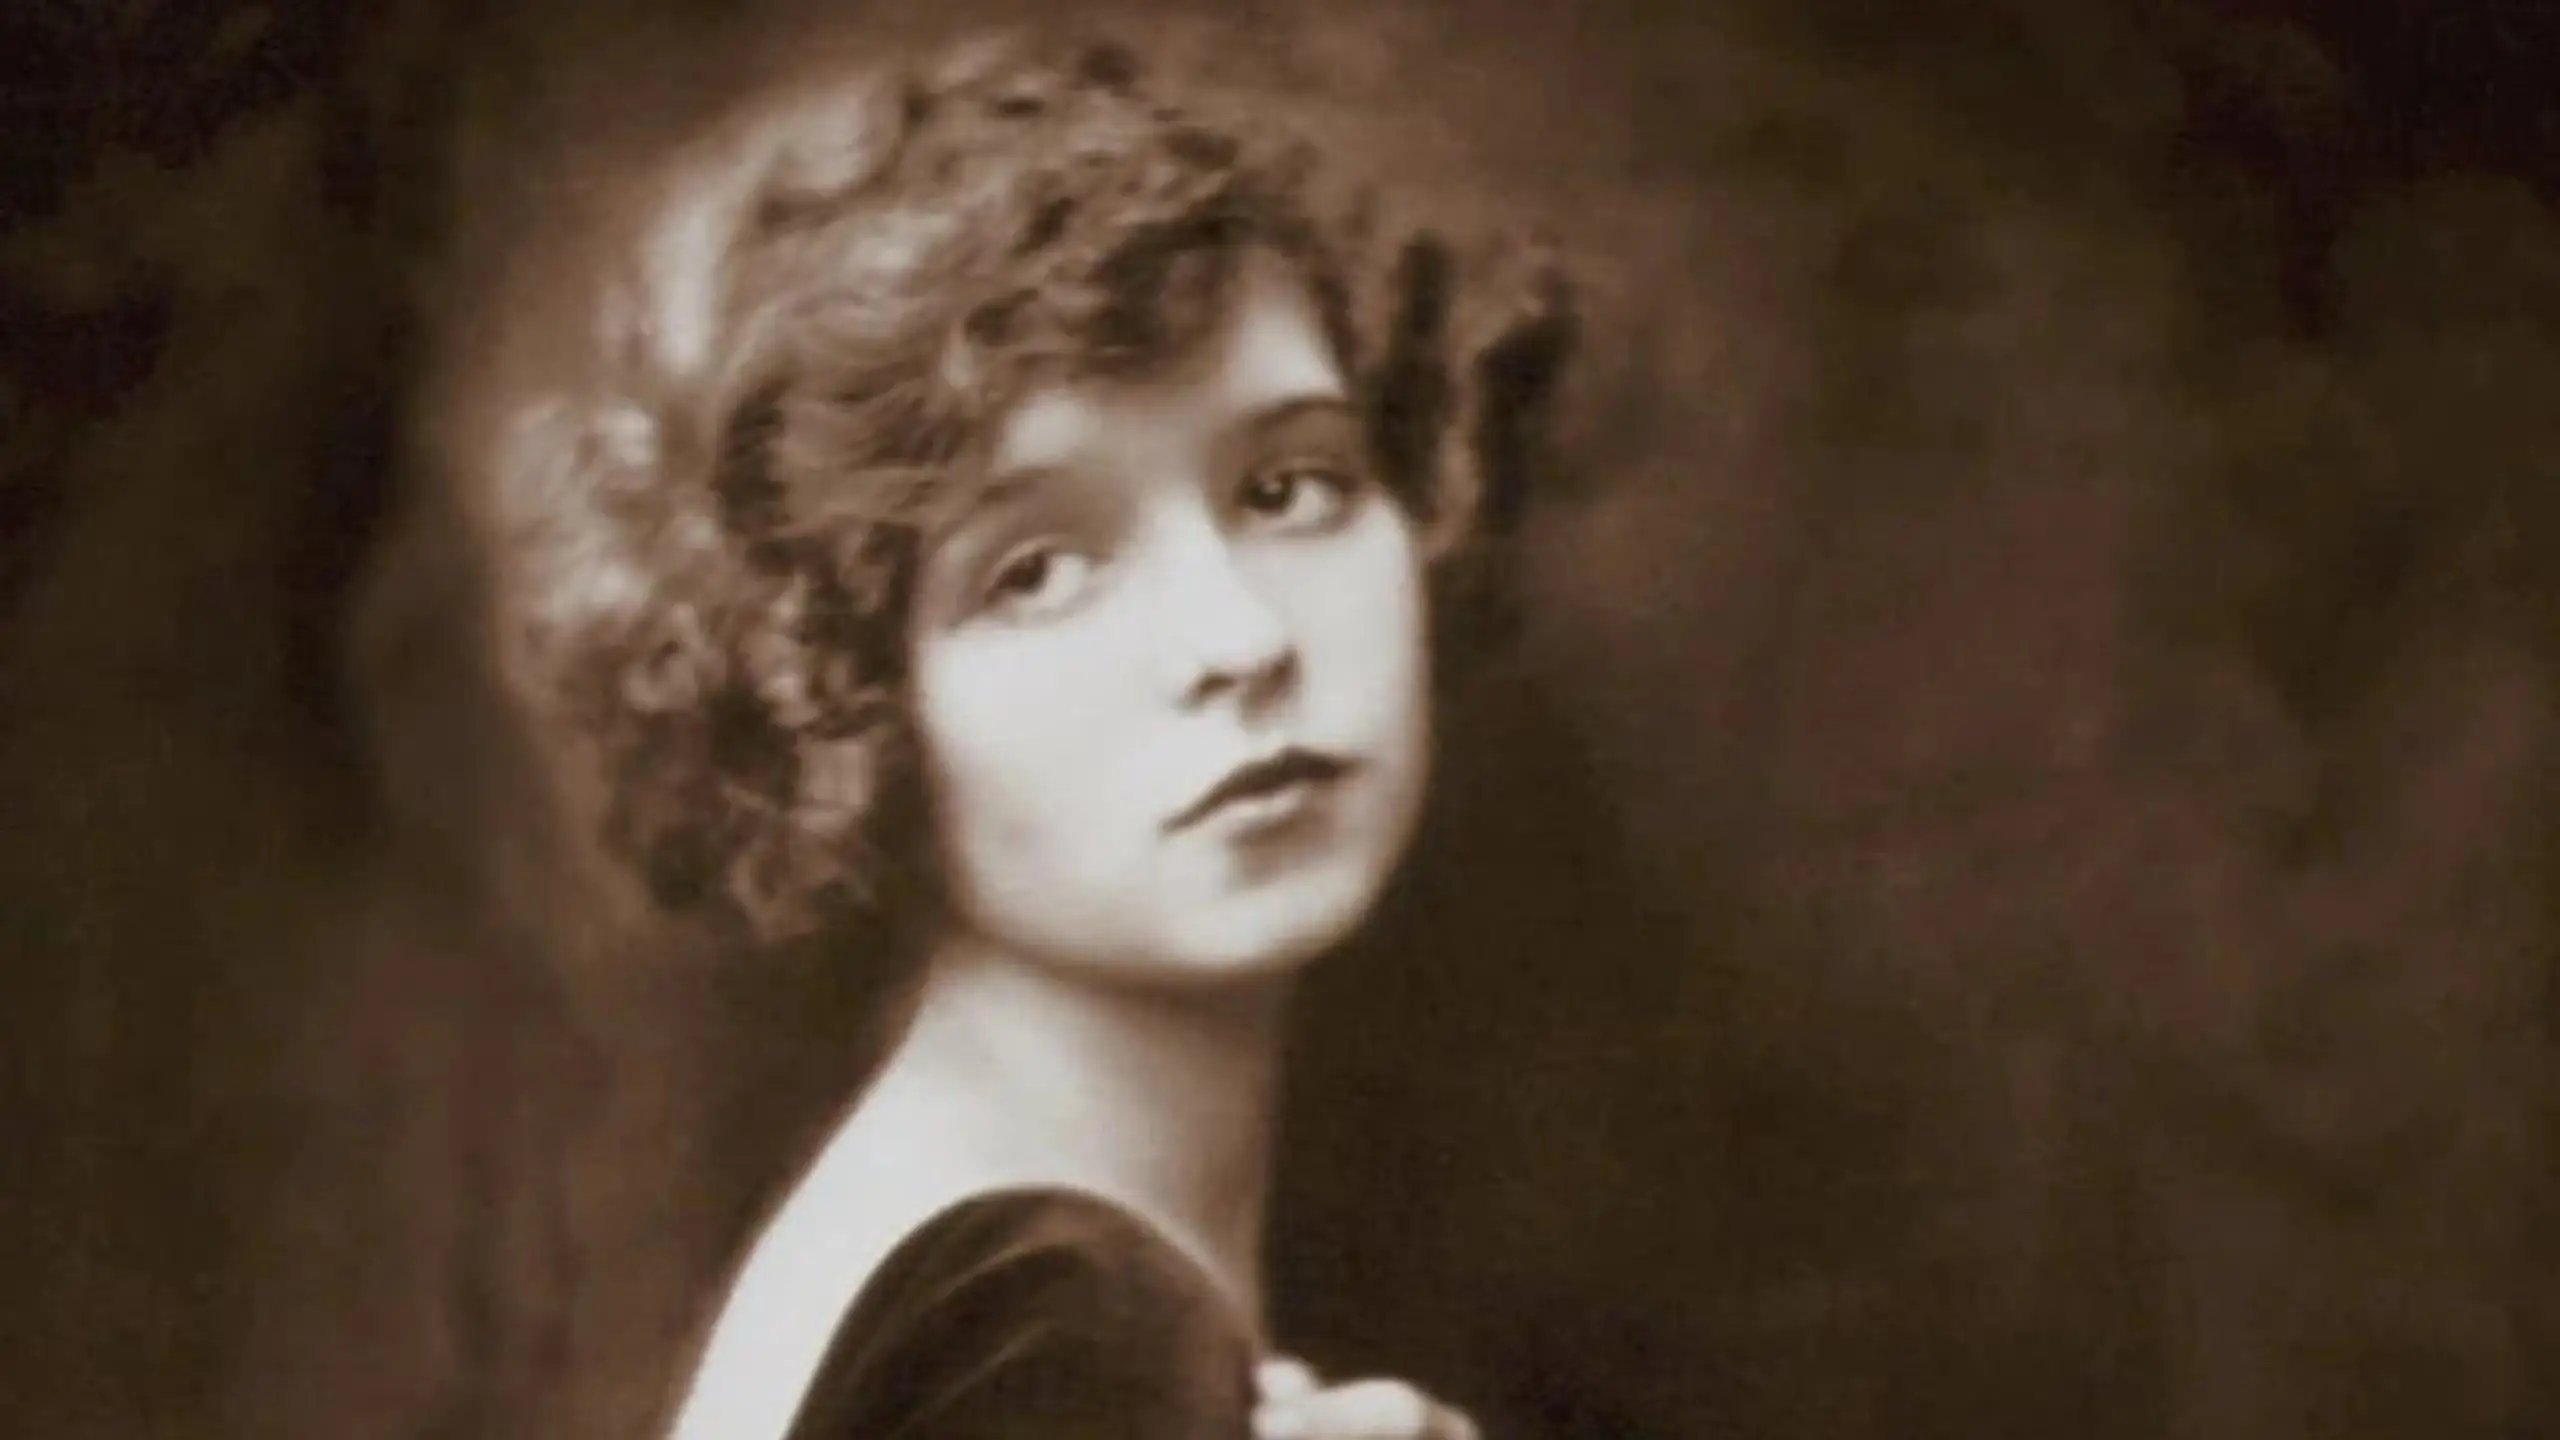 Clara Bow: Discovering the It Girl